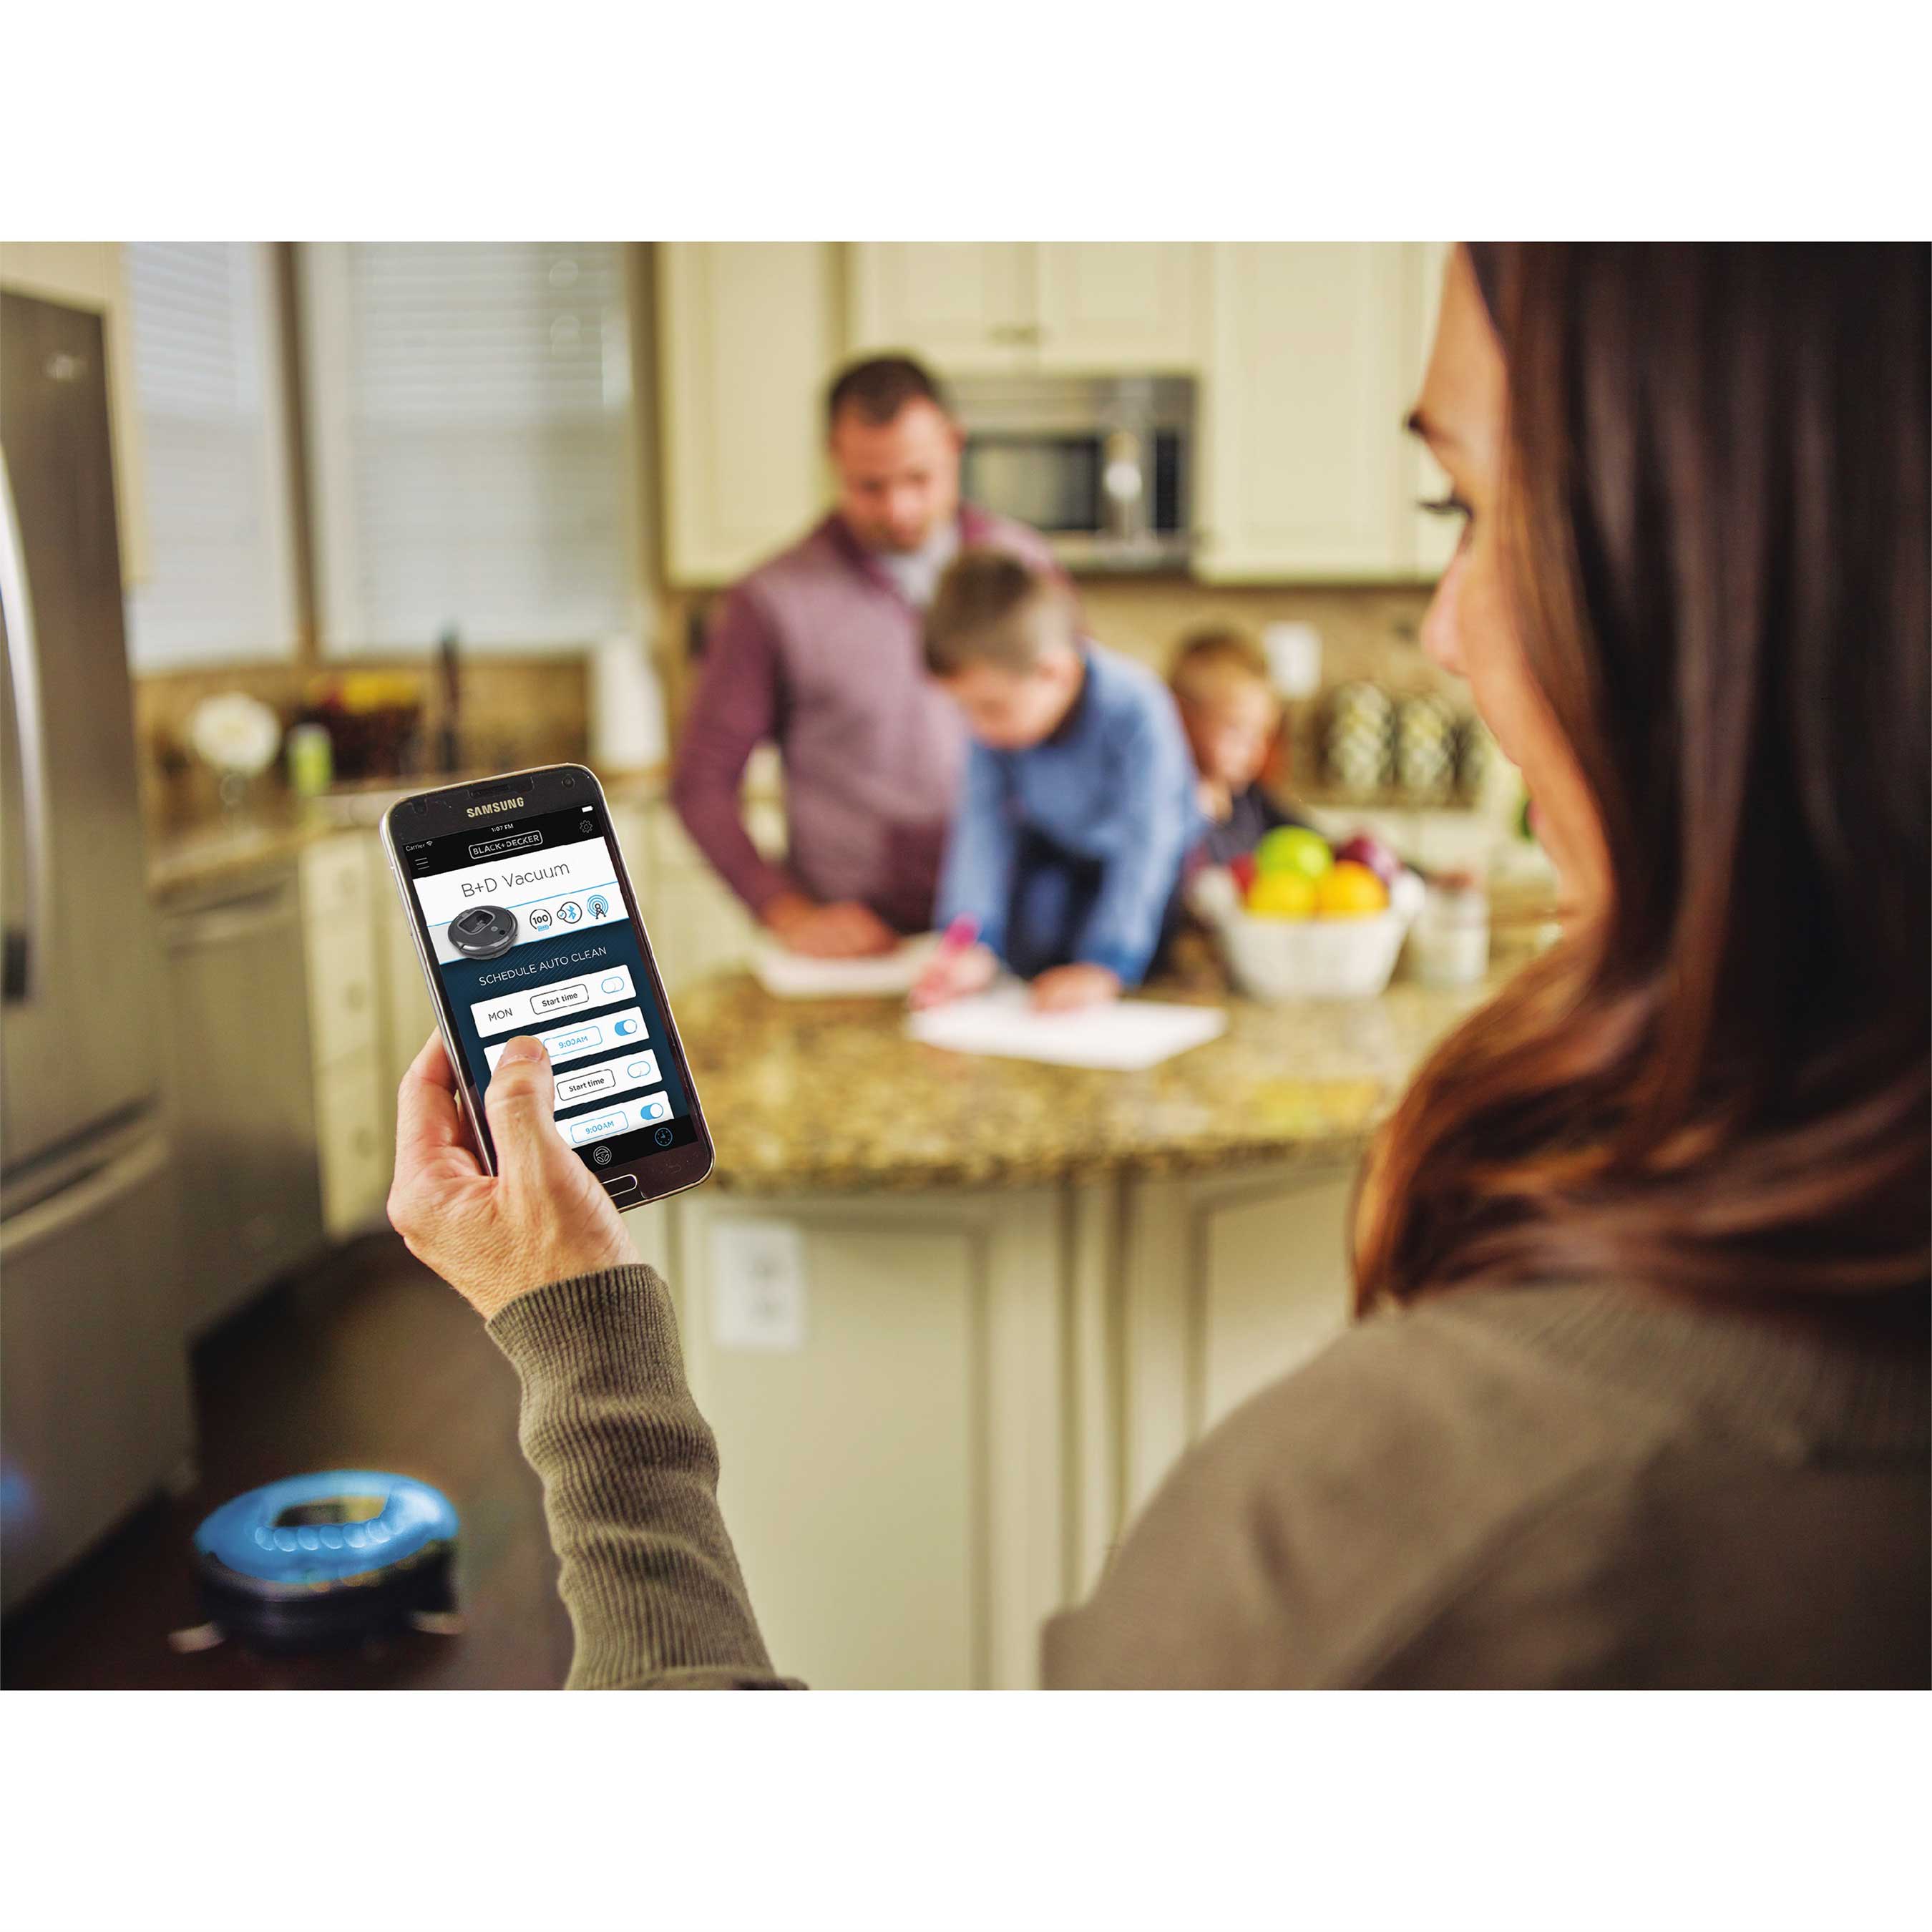 The new robotic vacuums connect to the BLACK+DECKER Mobile App via Bluetooth® Technology so homeowners can control the vacuum from their smartphone.